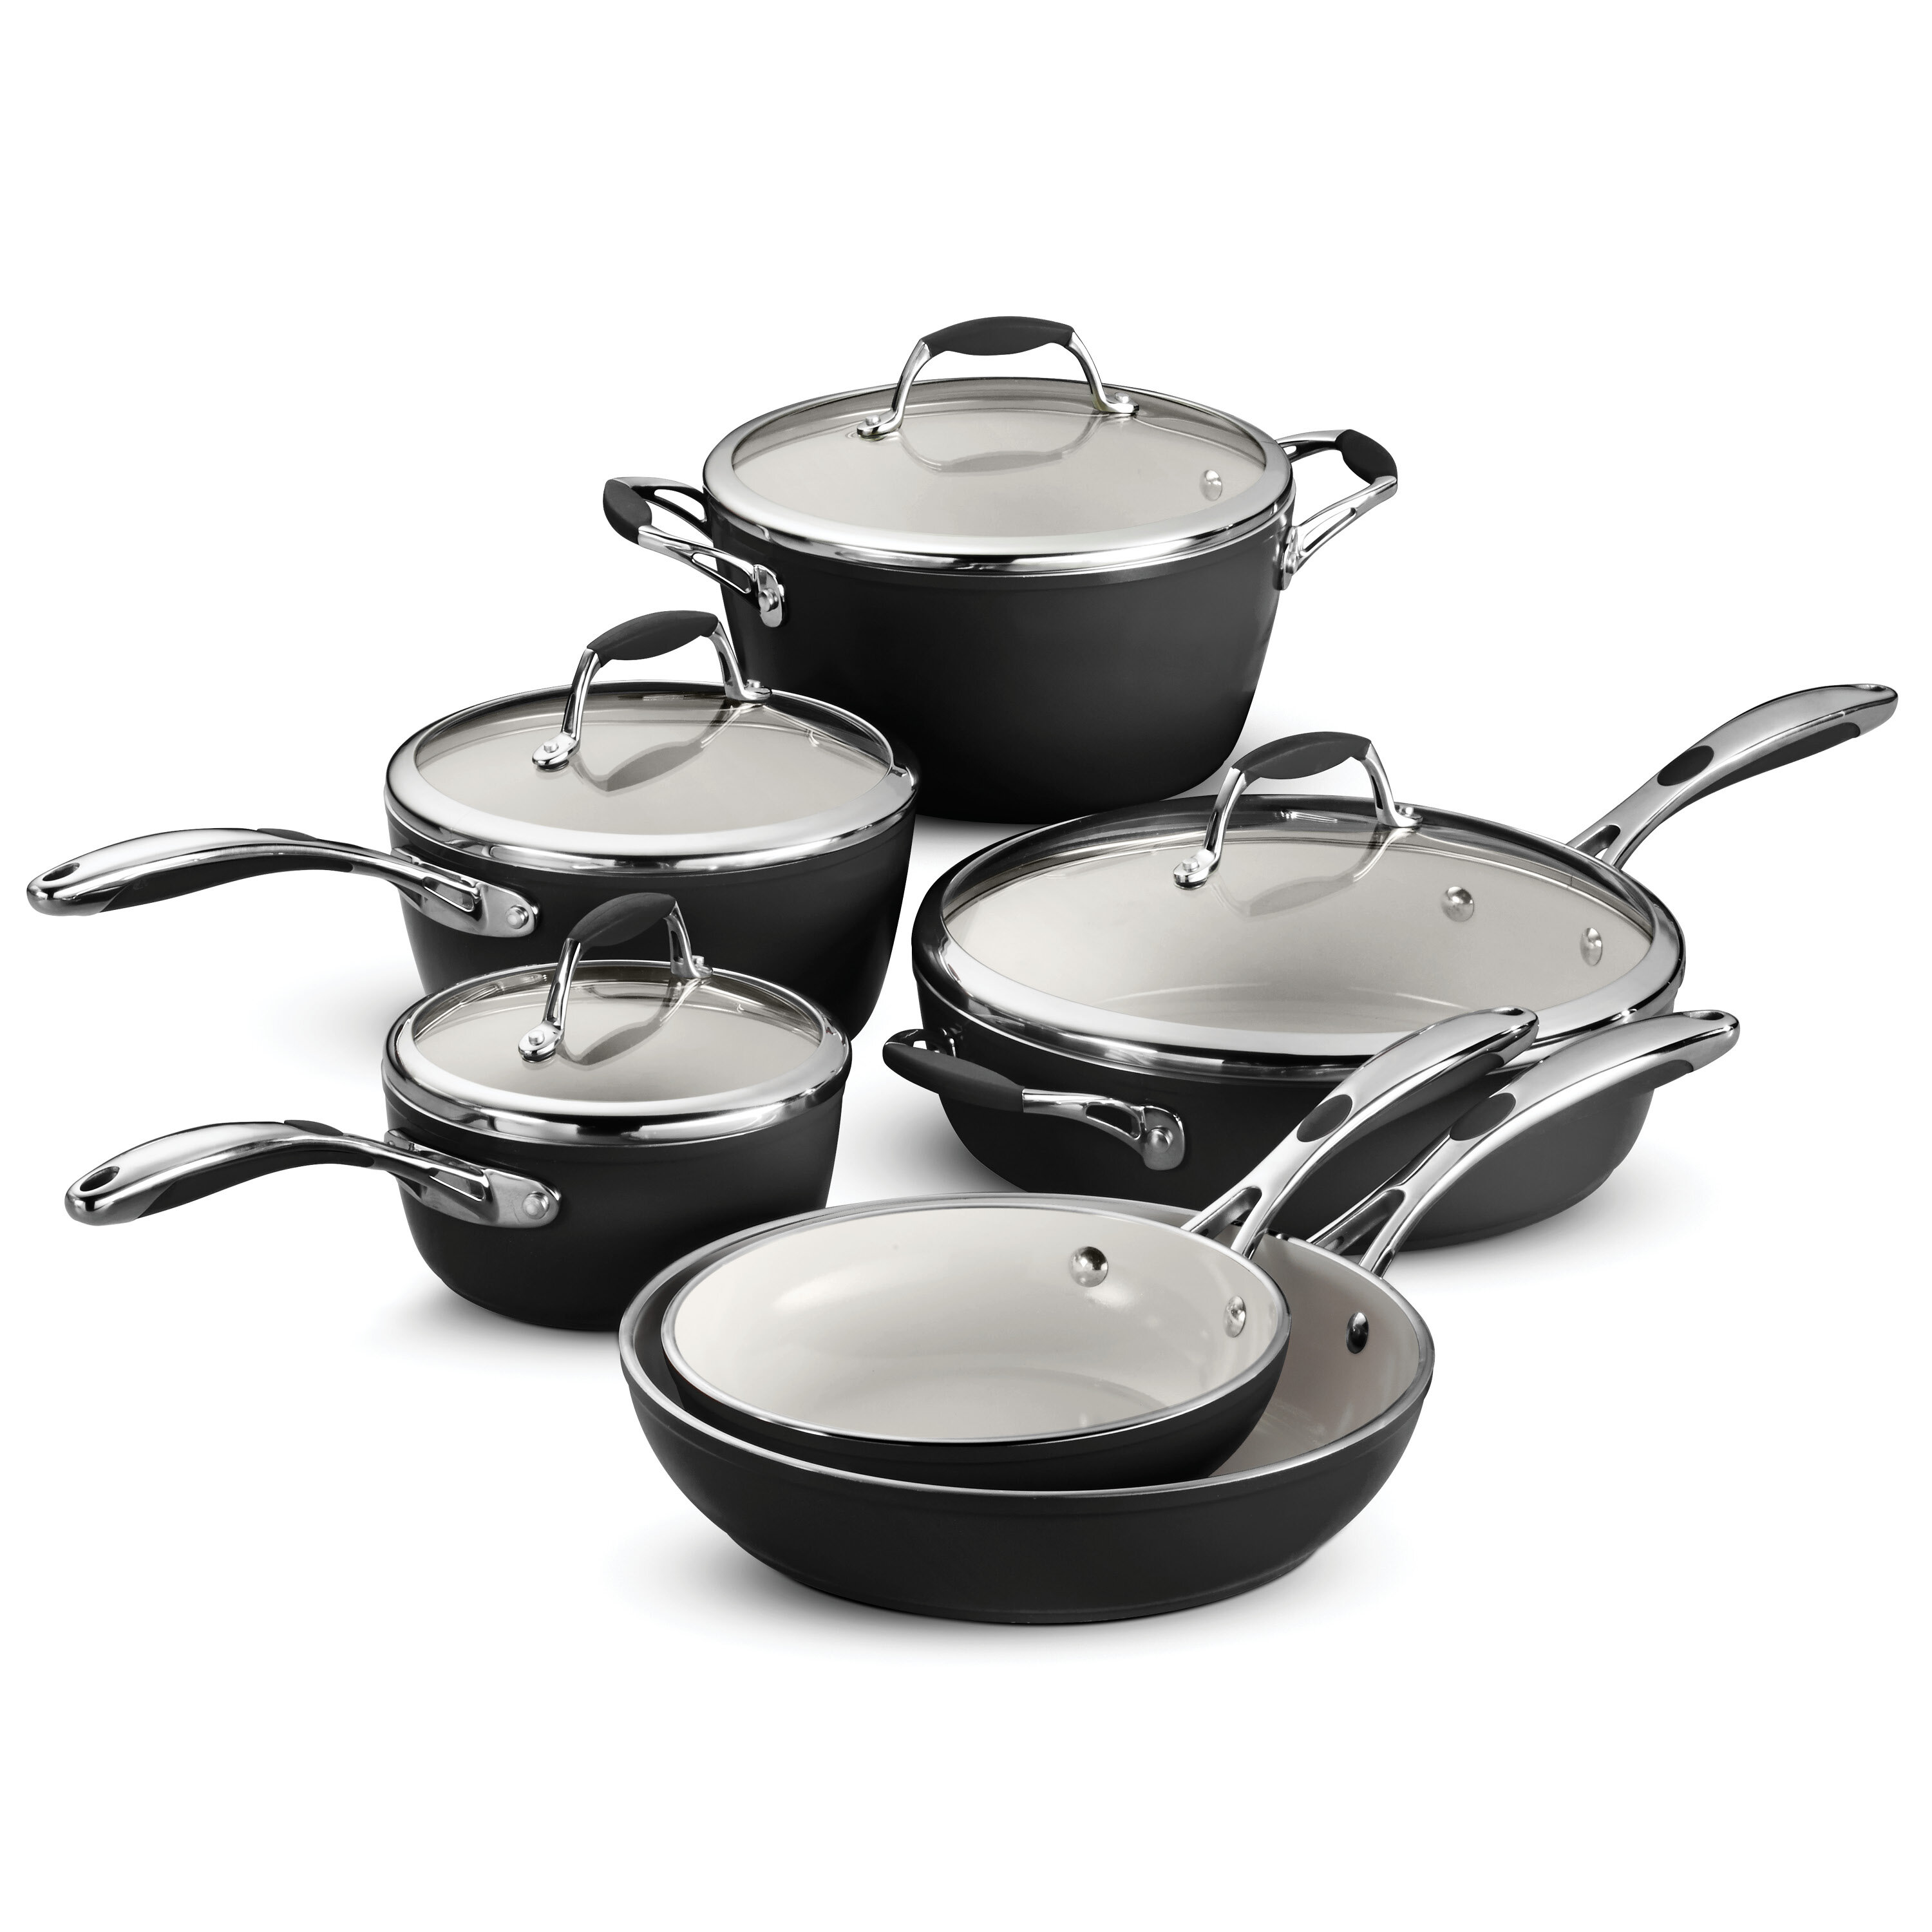 Redchef Ceramic Pots and Pans Set - 7-Piece White Nonstick Kitchen Cookware  Sets with Glass Lid 